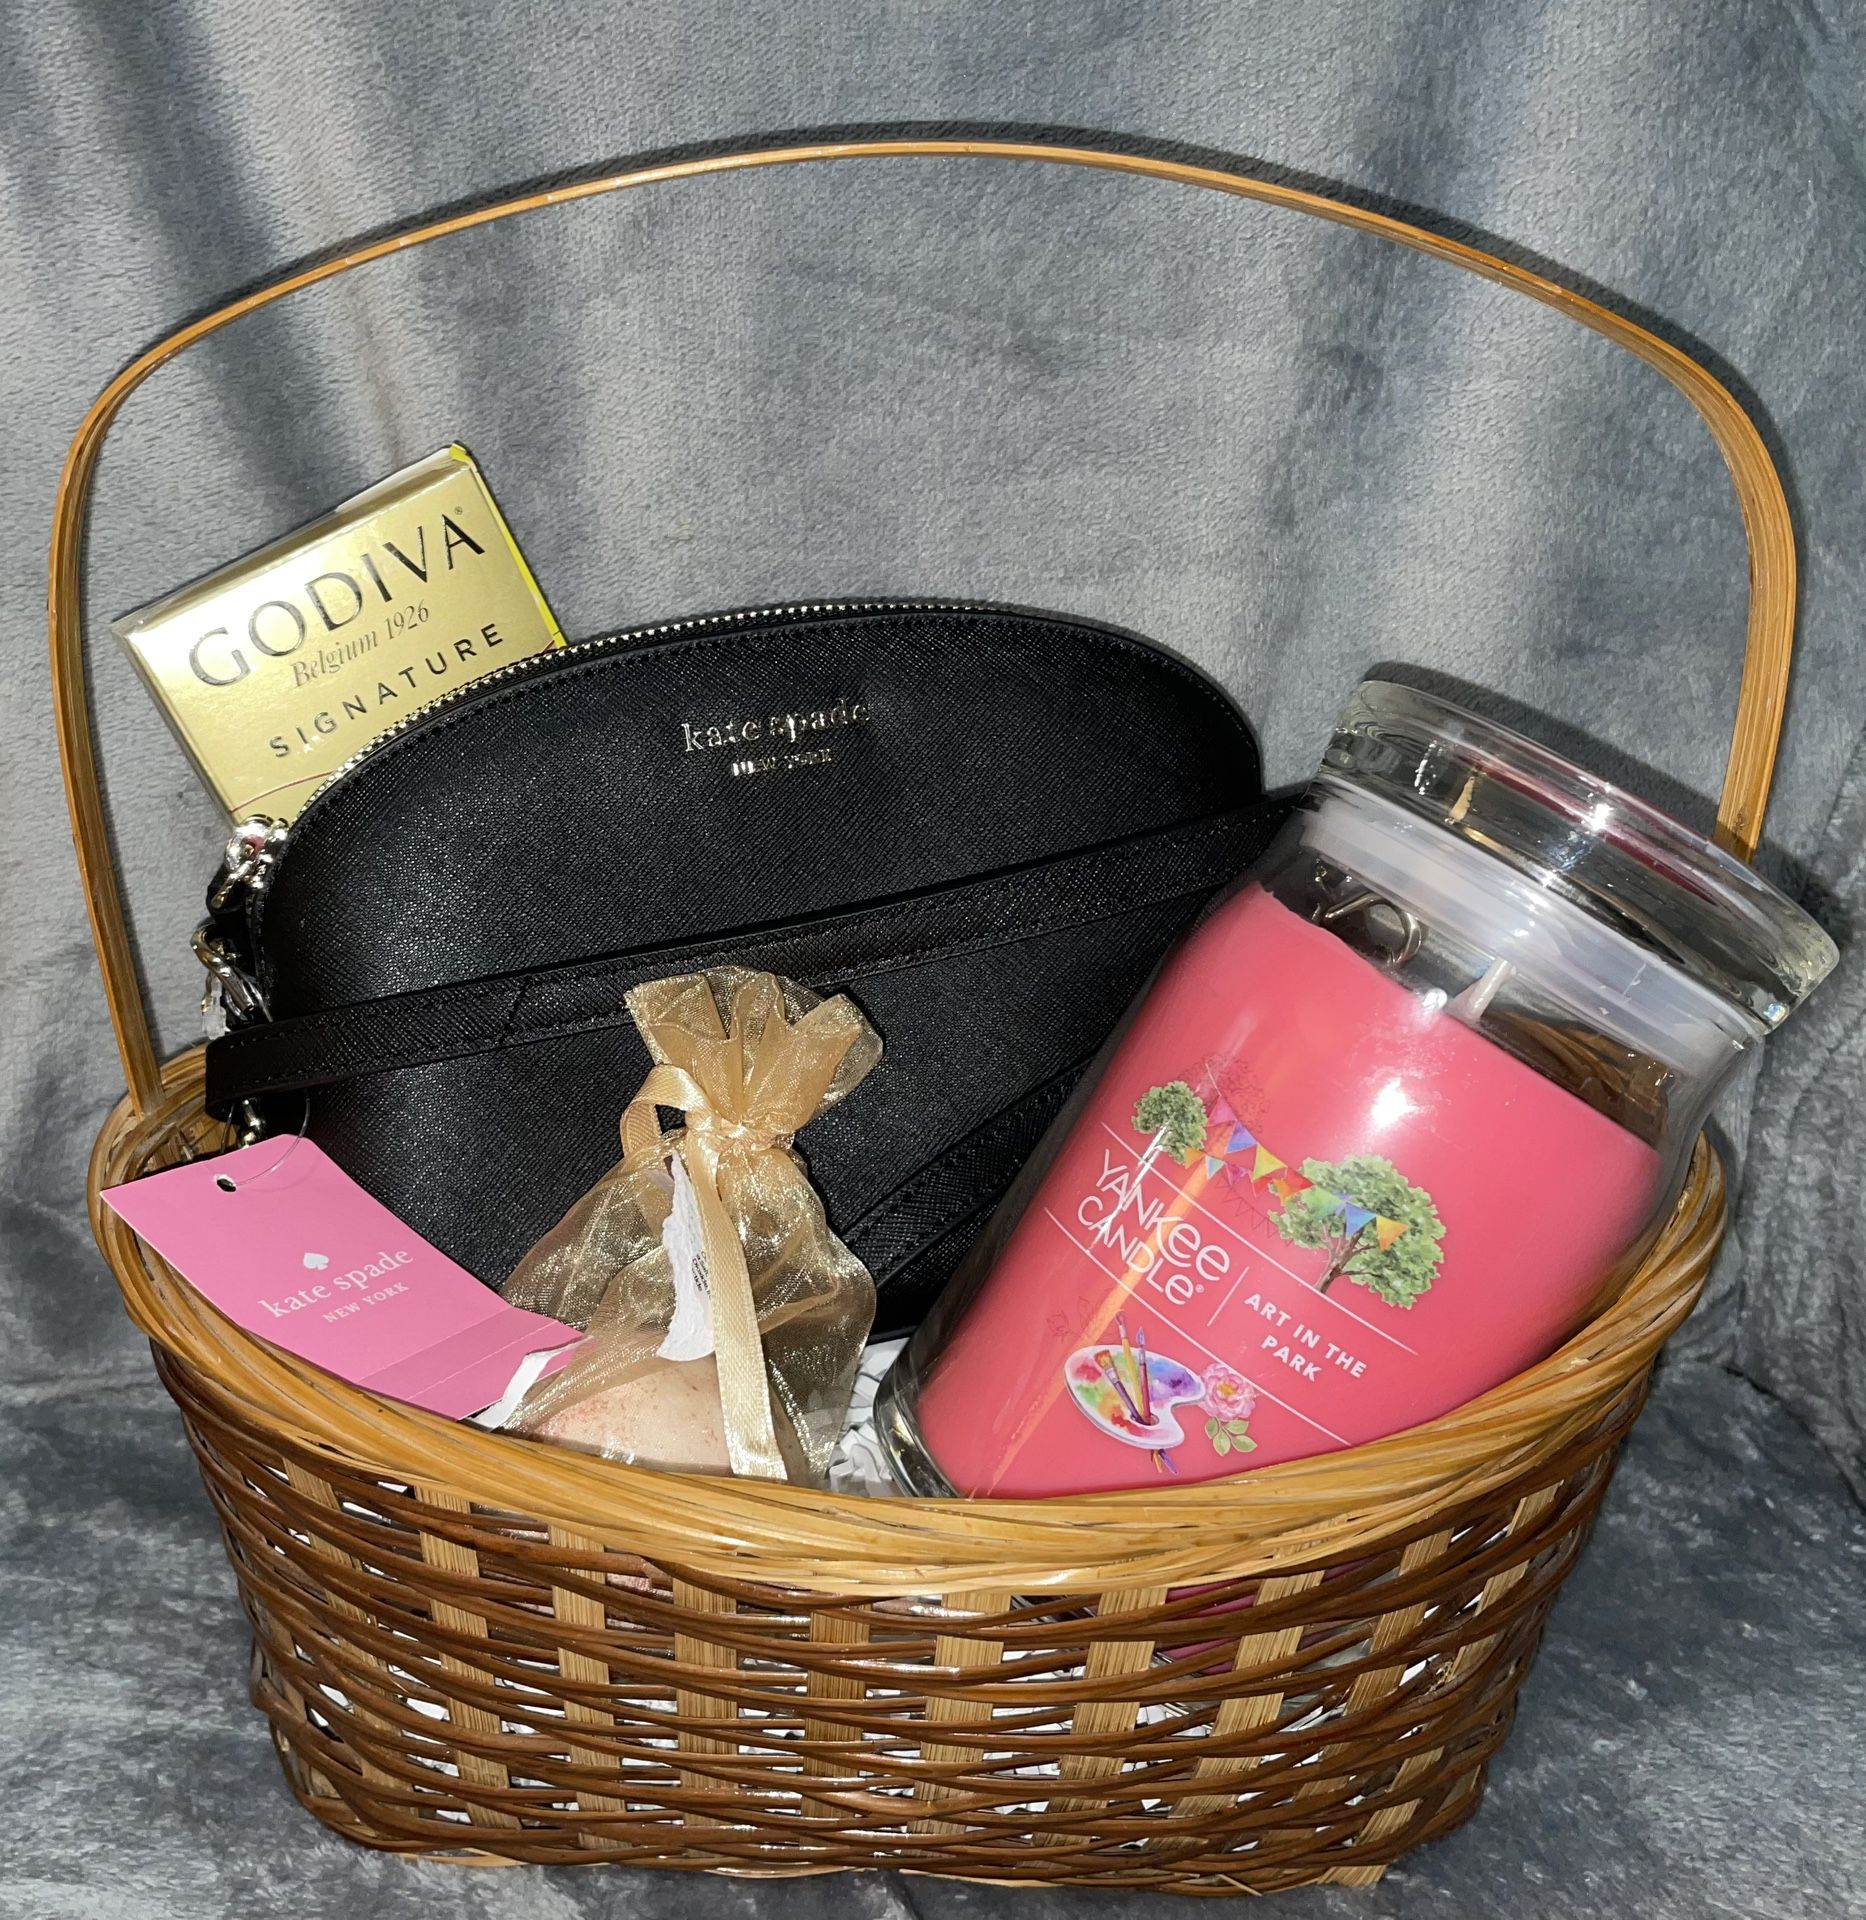 $100 Firm Gift Basket New Black Kate Spade Crossbody With Large Yankee Candle And Bath Bomb, Godiva Chocolate Bar 